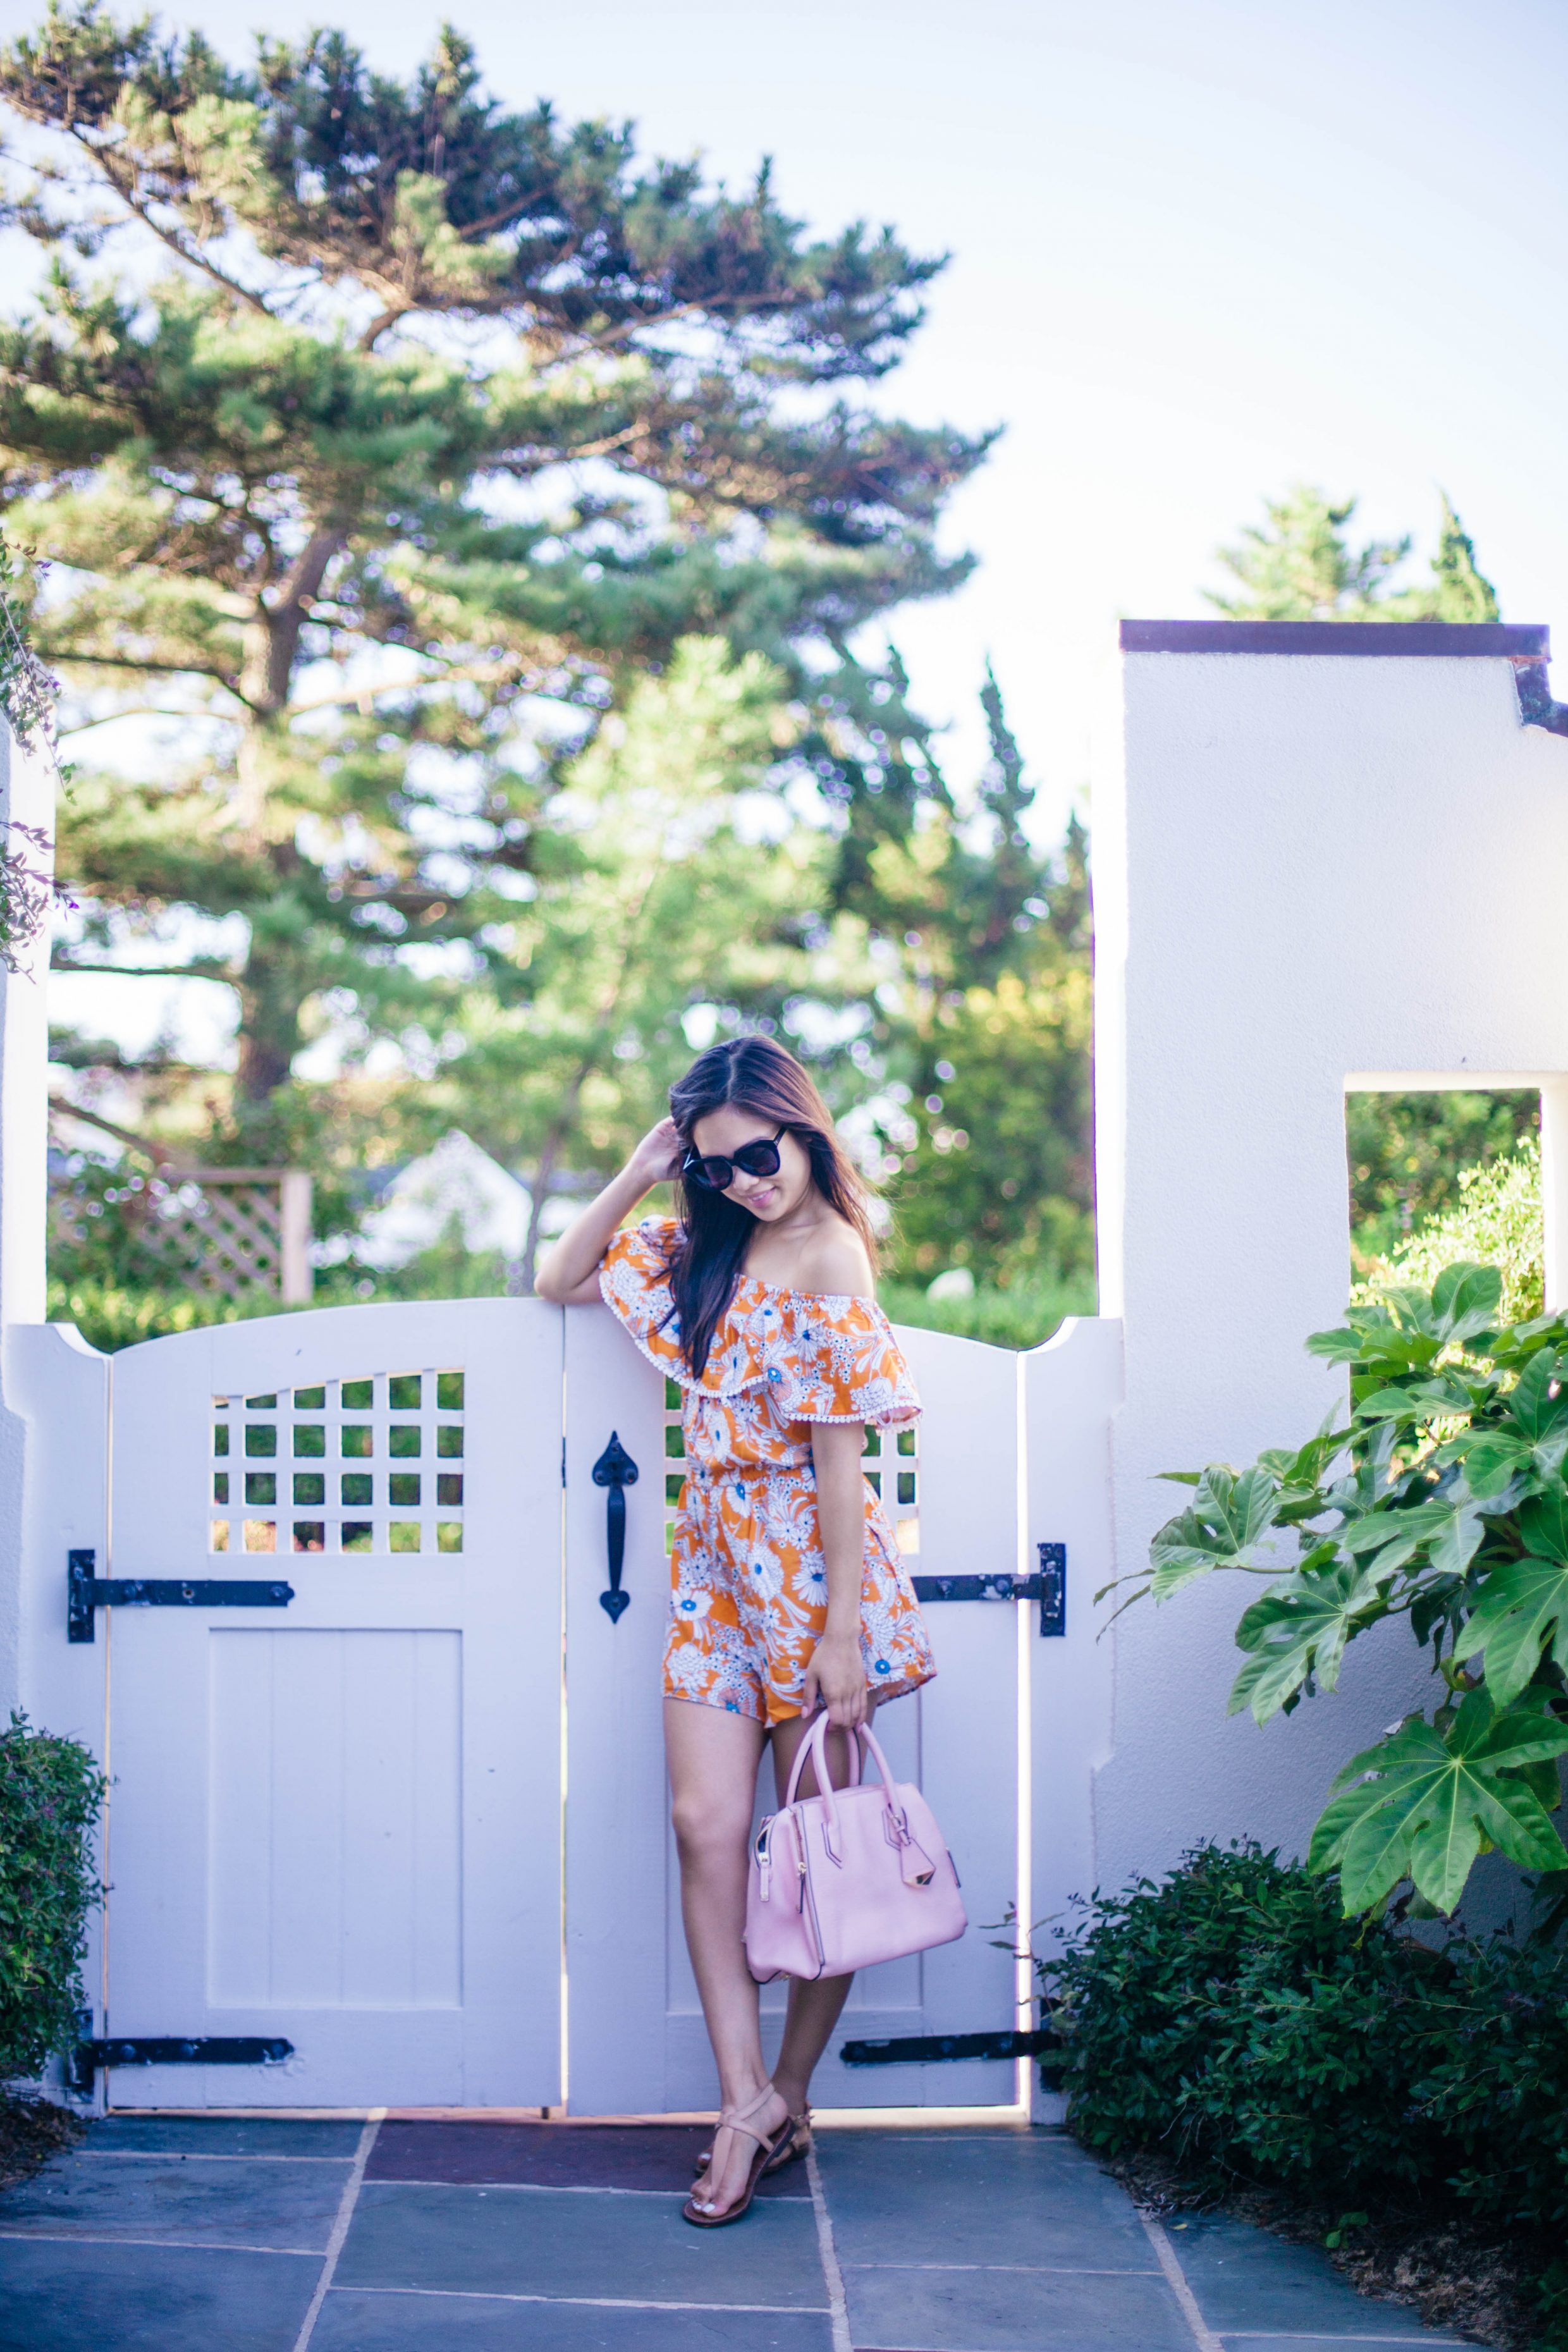 made,by,minkpink,target,collaboration,north,end,virginia,beach,oceanfront,beach,houses,cover,up,floral,yellow,luscious,sam,edelman,gigi,sandals,karen,walker,number,one,sunnies,rebecca,minkoff,perry,satchel,blush,pink,orange,playsuit,off,the,shoulder,